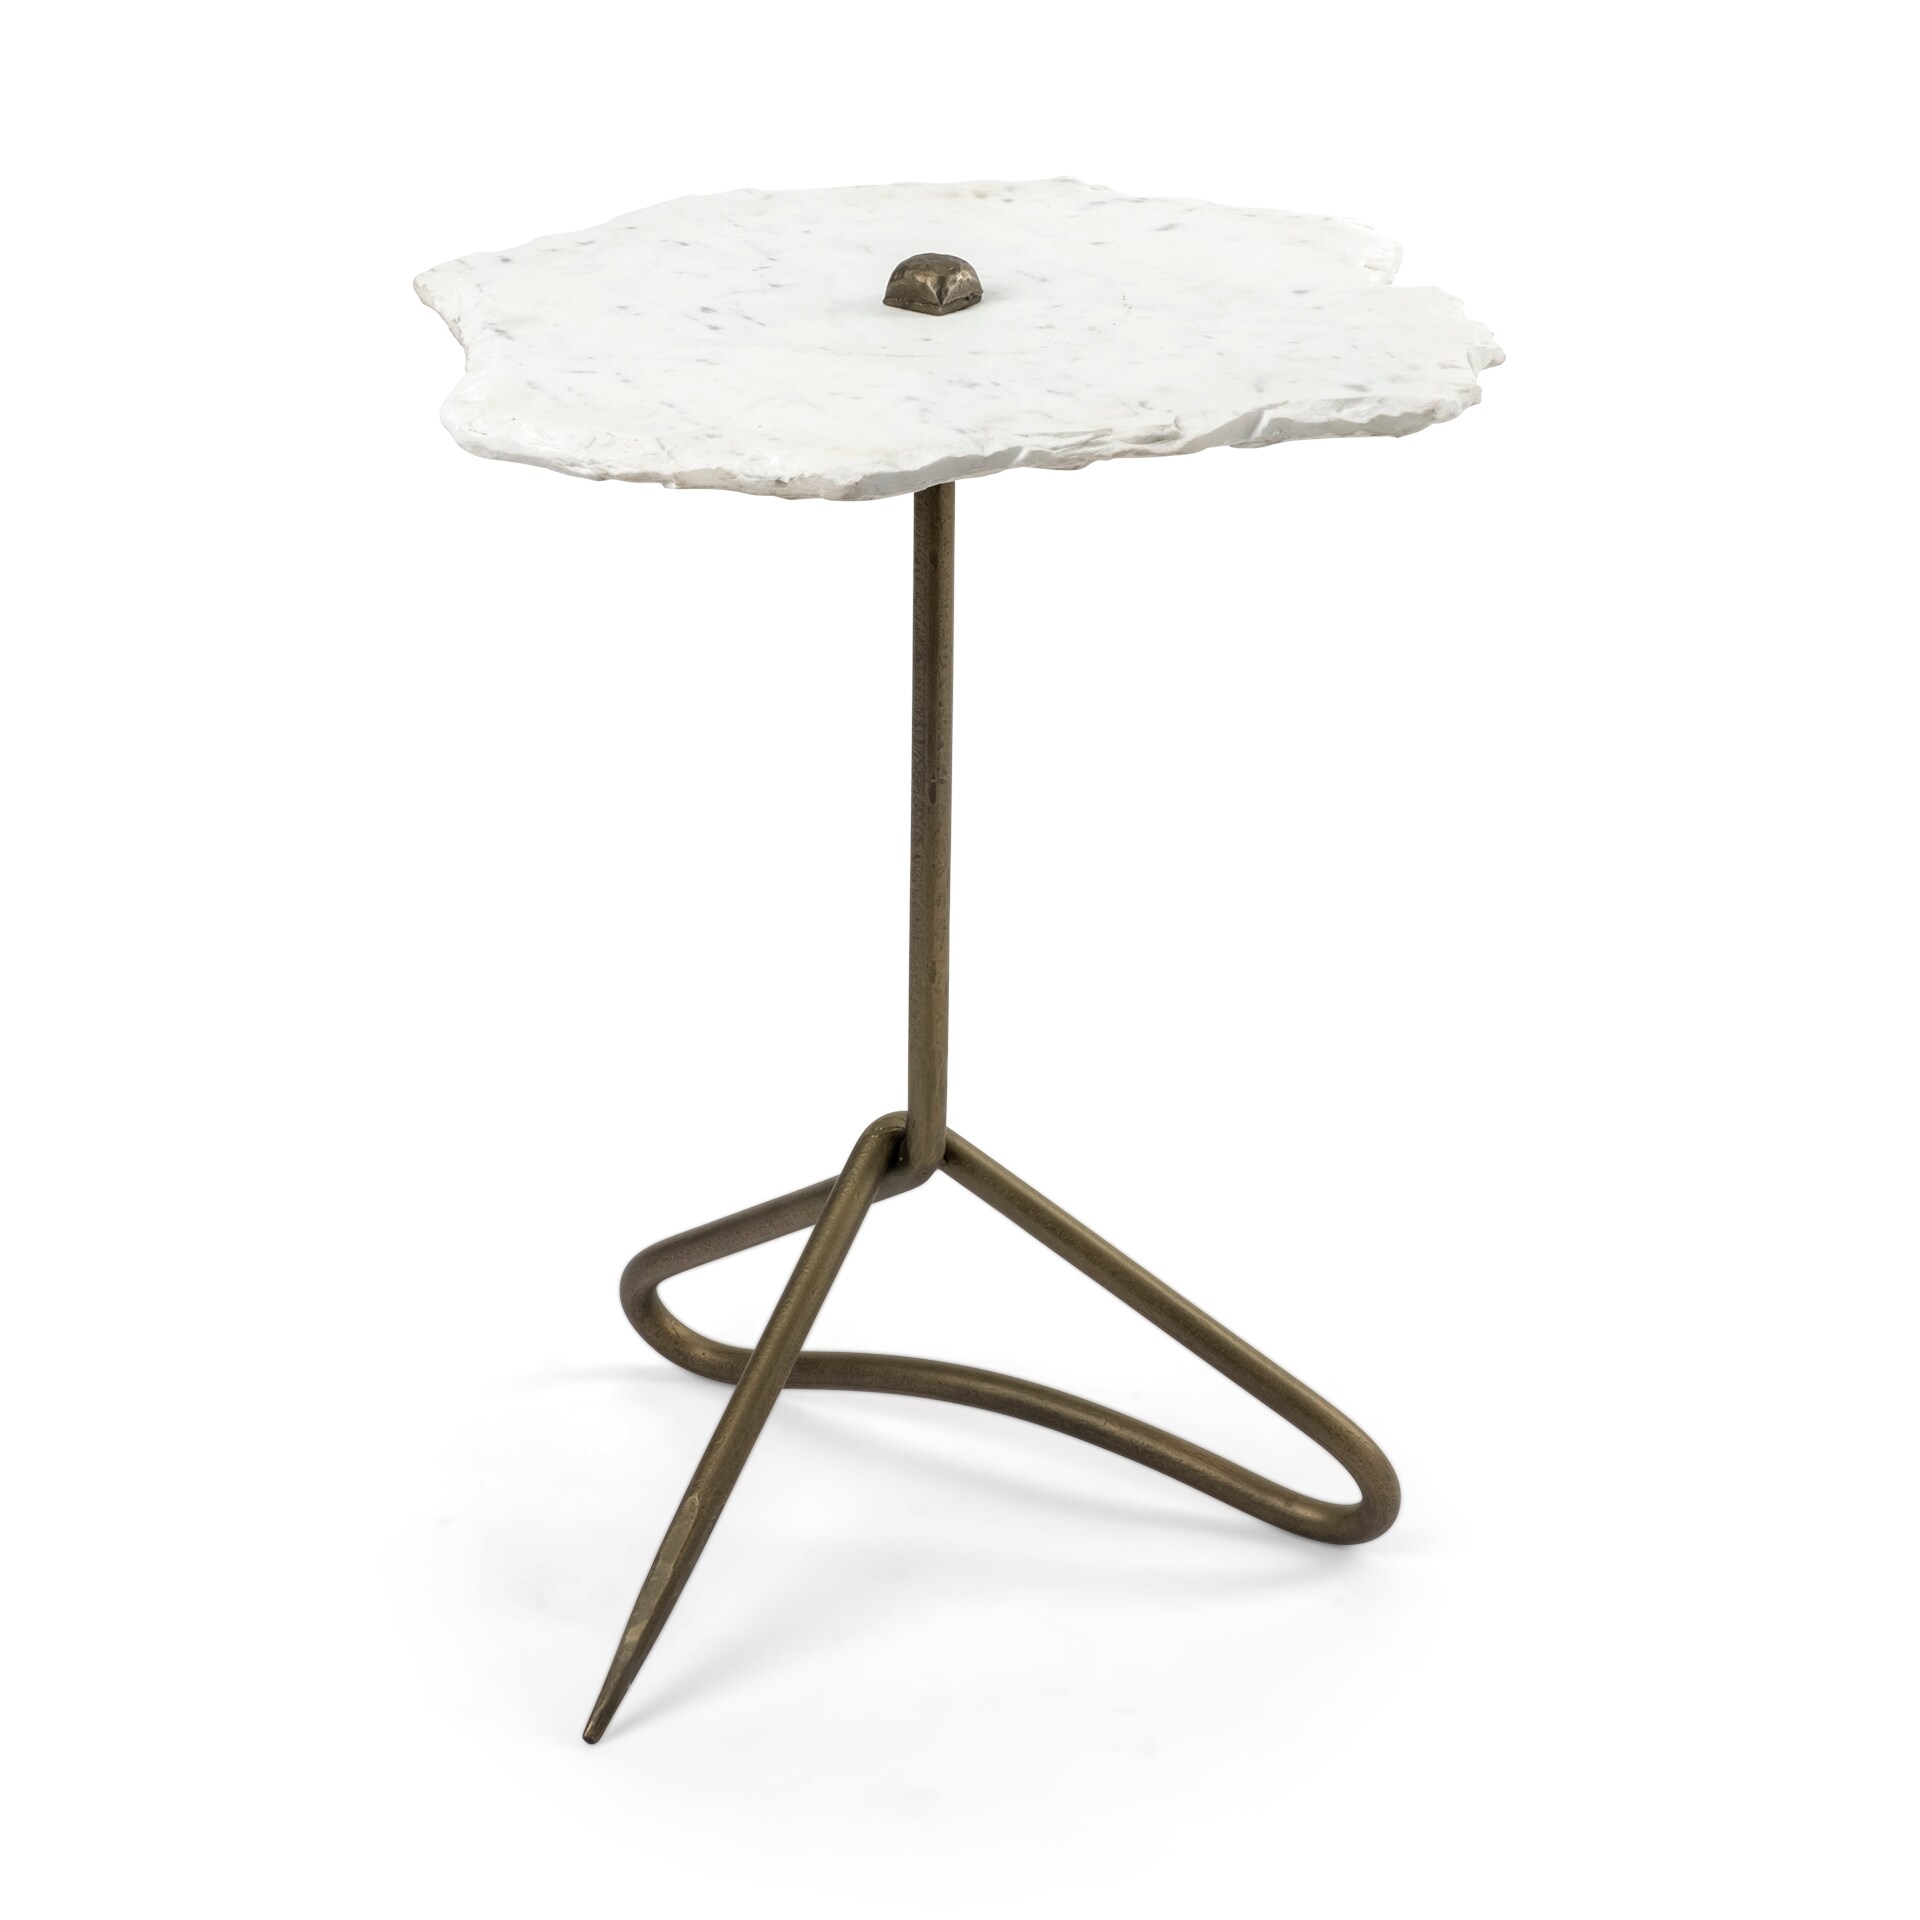 Mercana Pinera White Marble Stone Live Edge Glam End Table at Lowes.com